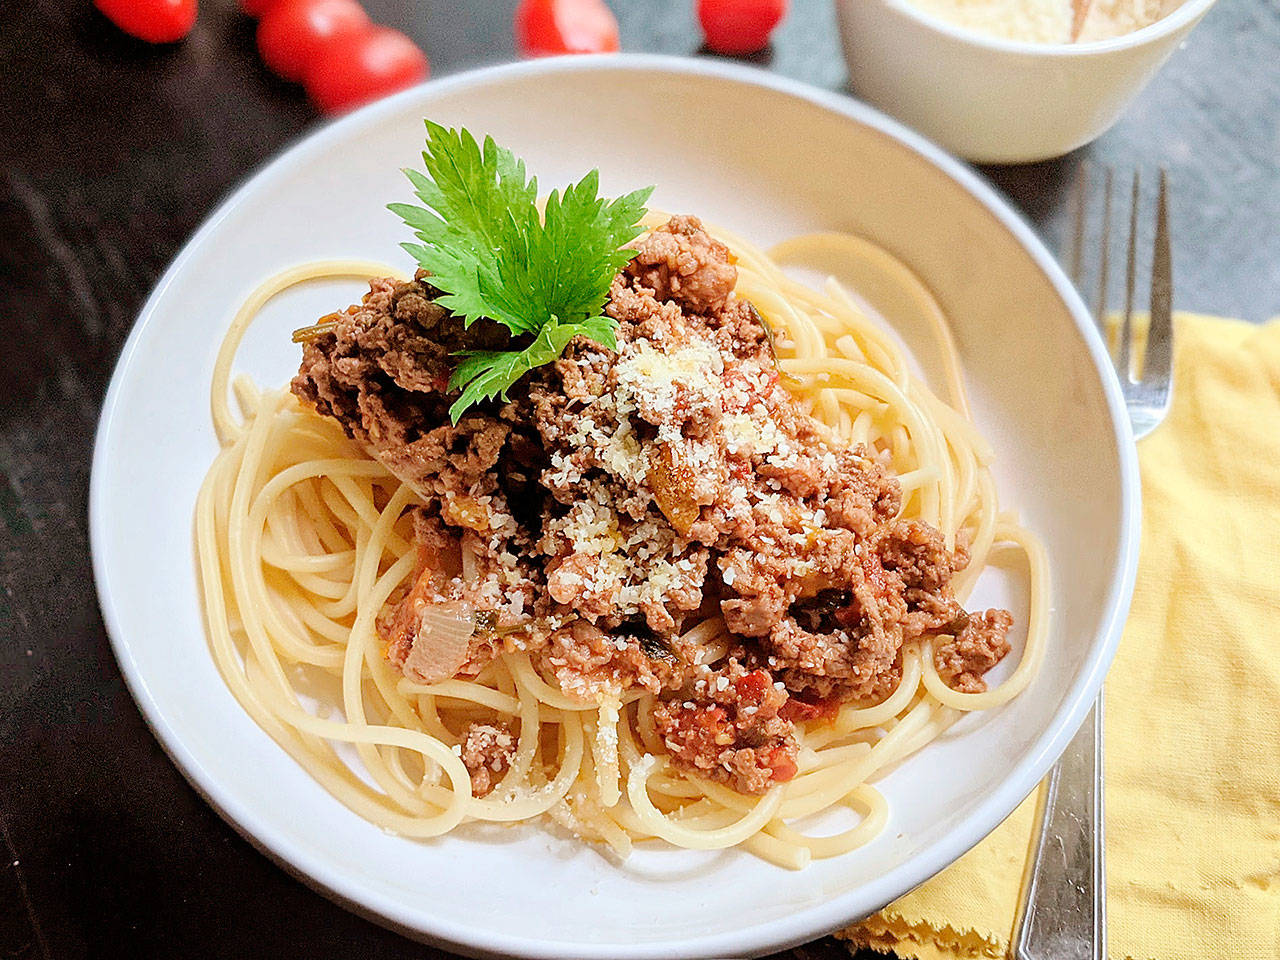 Pasta with a quick-to-prepare bolognese sauce is perfect for busy school nights. (Gretchen McKay / Pittsburgh Post-Gazette)